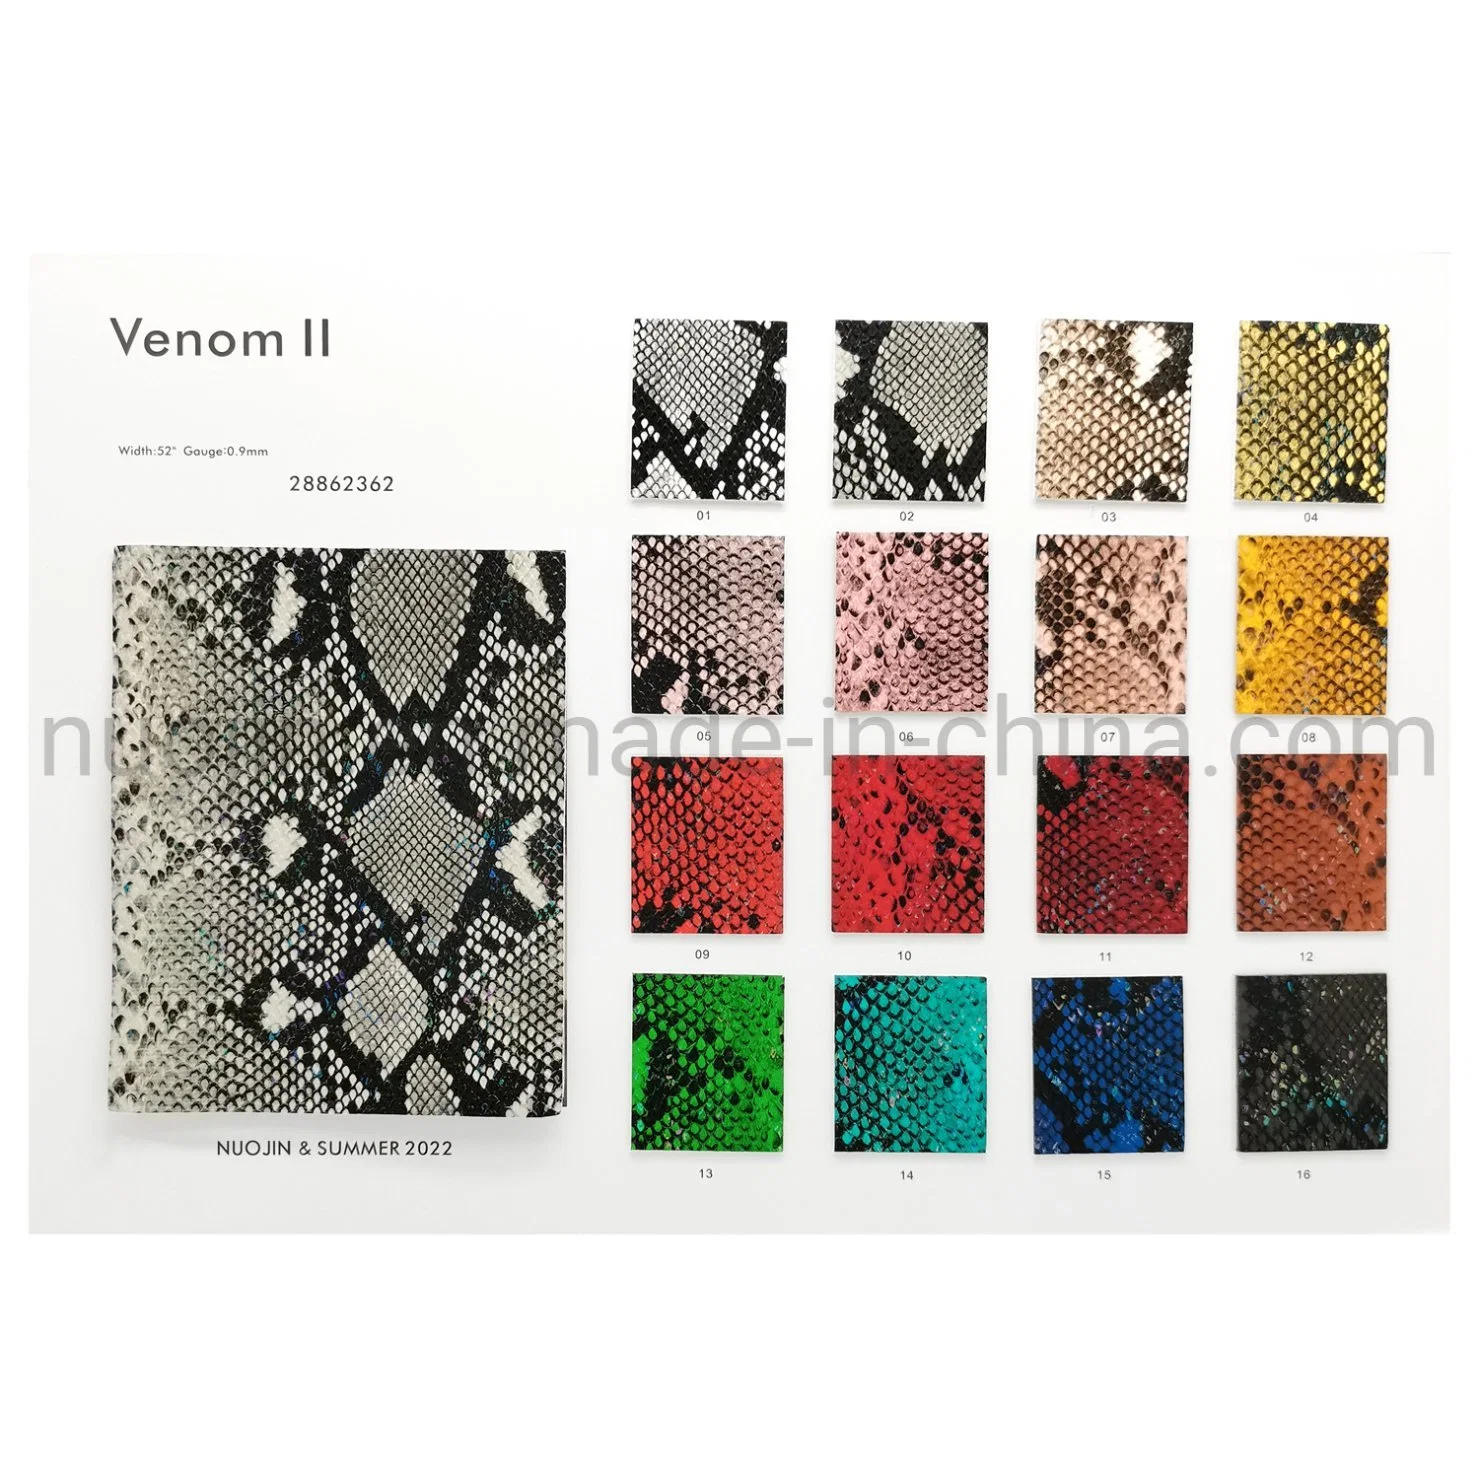 Multi Color Skin-Friendly Snakeskin Embossed Faux Synthetic PU Leather Fabric for Handbags Totes Purse Wallet Shoes Sandals